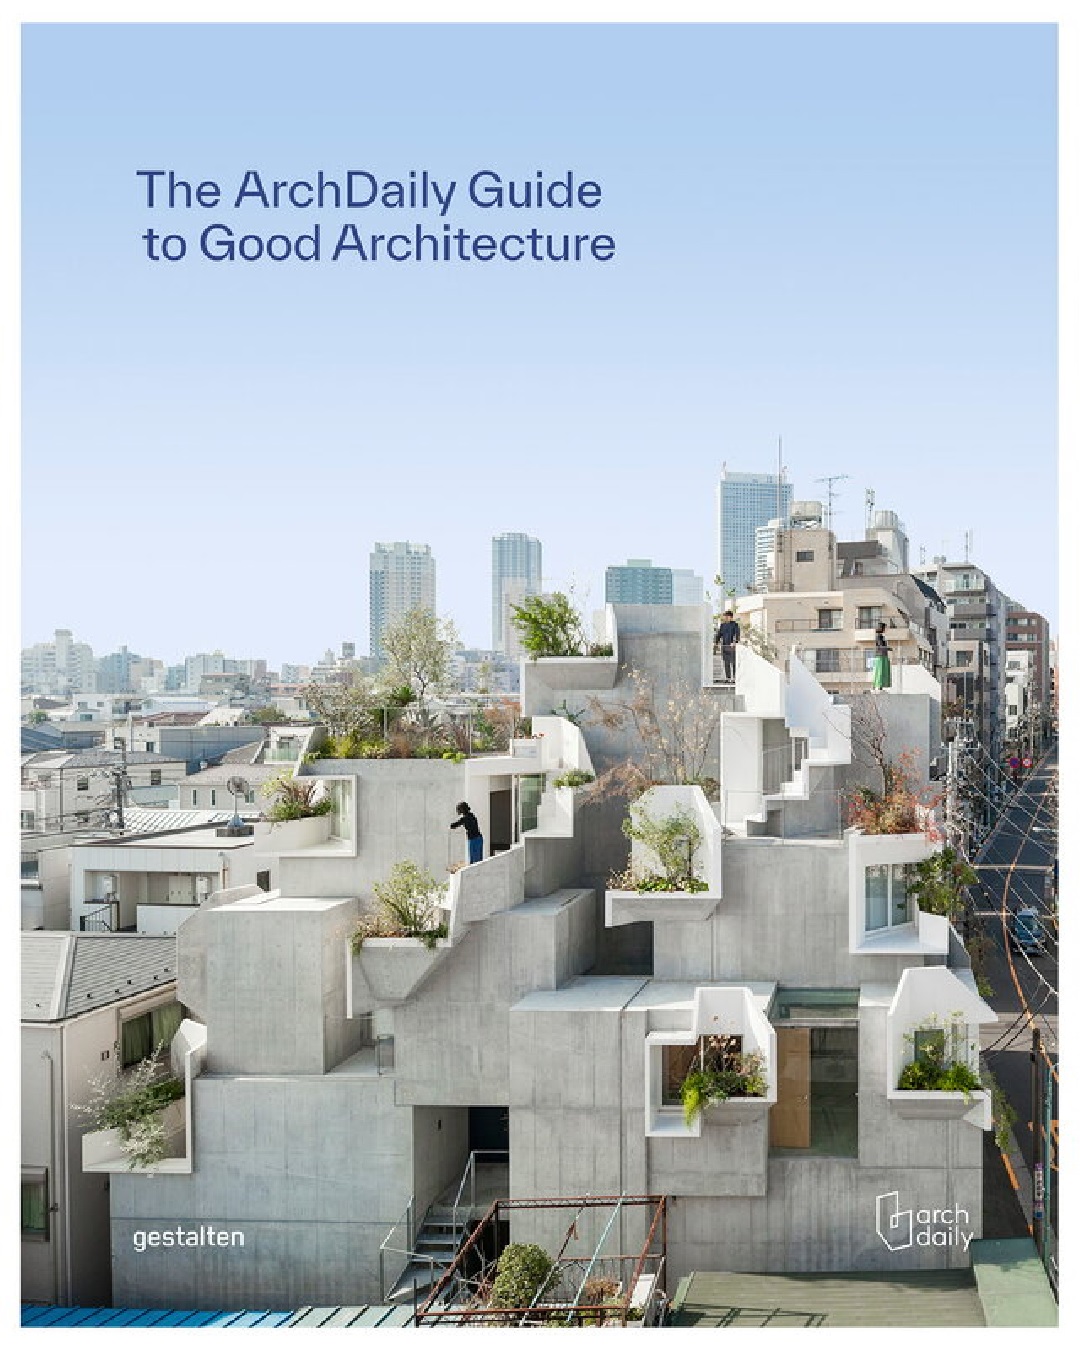 The archdaily guide to good architecture book